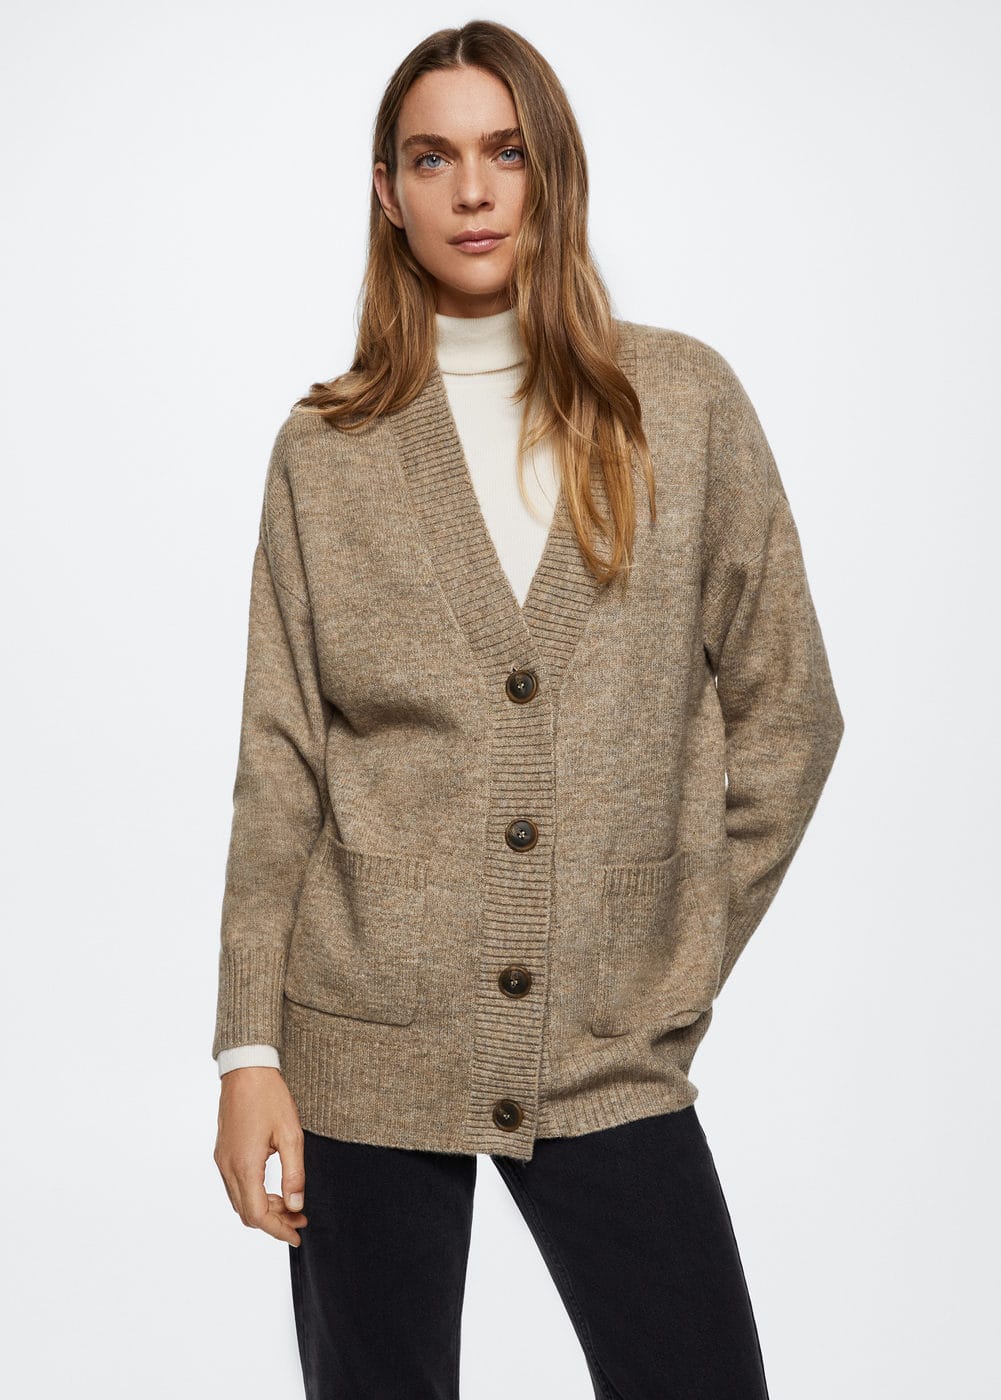 Chic at Every Age, Spring Cardigan Under $100